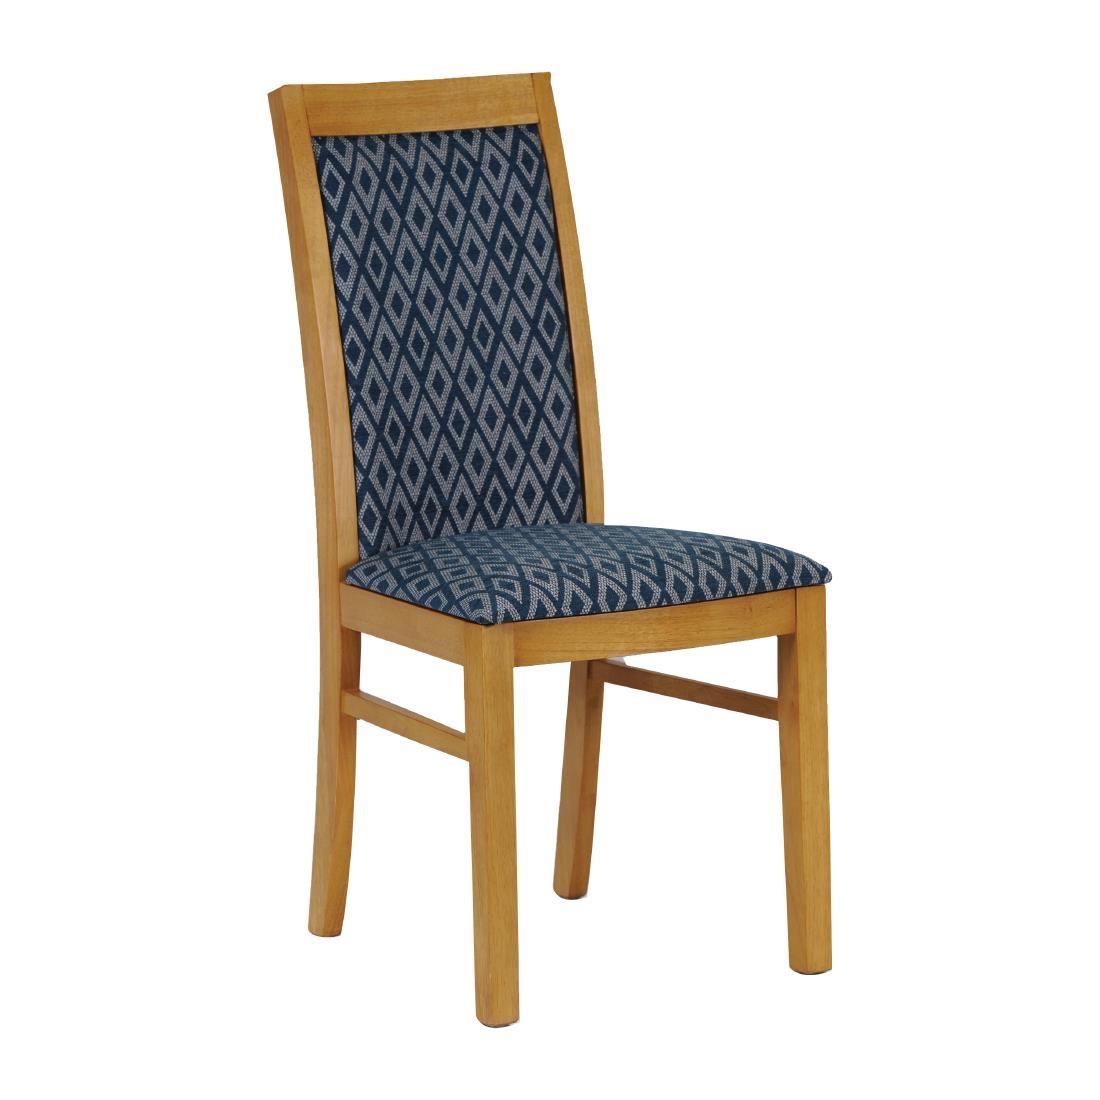 Brooklyn Padded Back Soft Oak Dining Chair with Black Diamond Padded Seat and Back (Pack of 2) - FT417  - 1